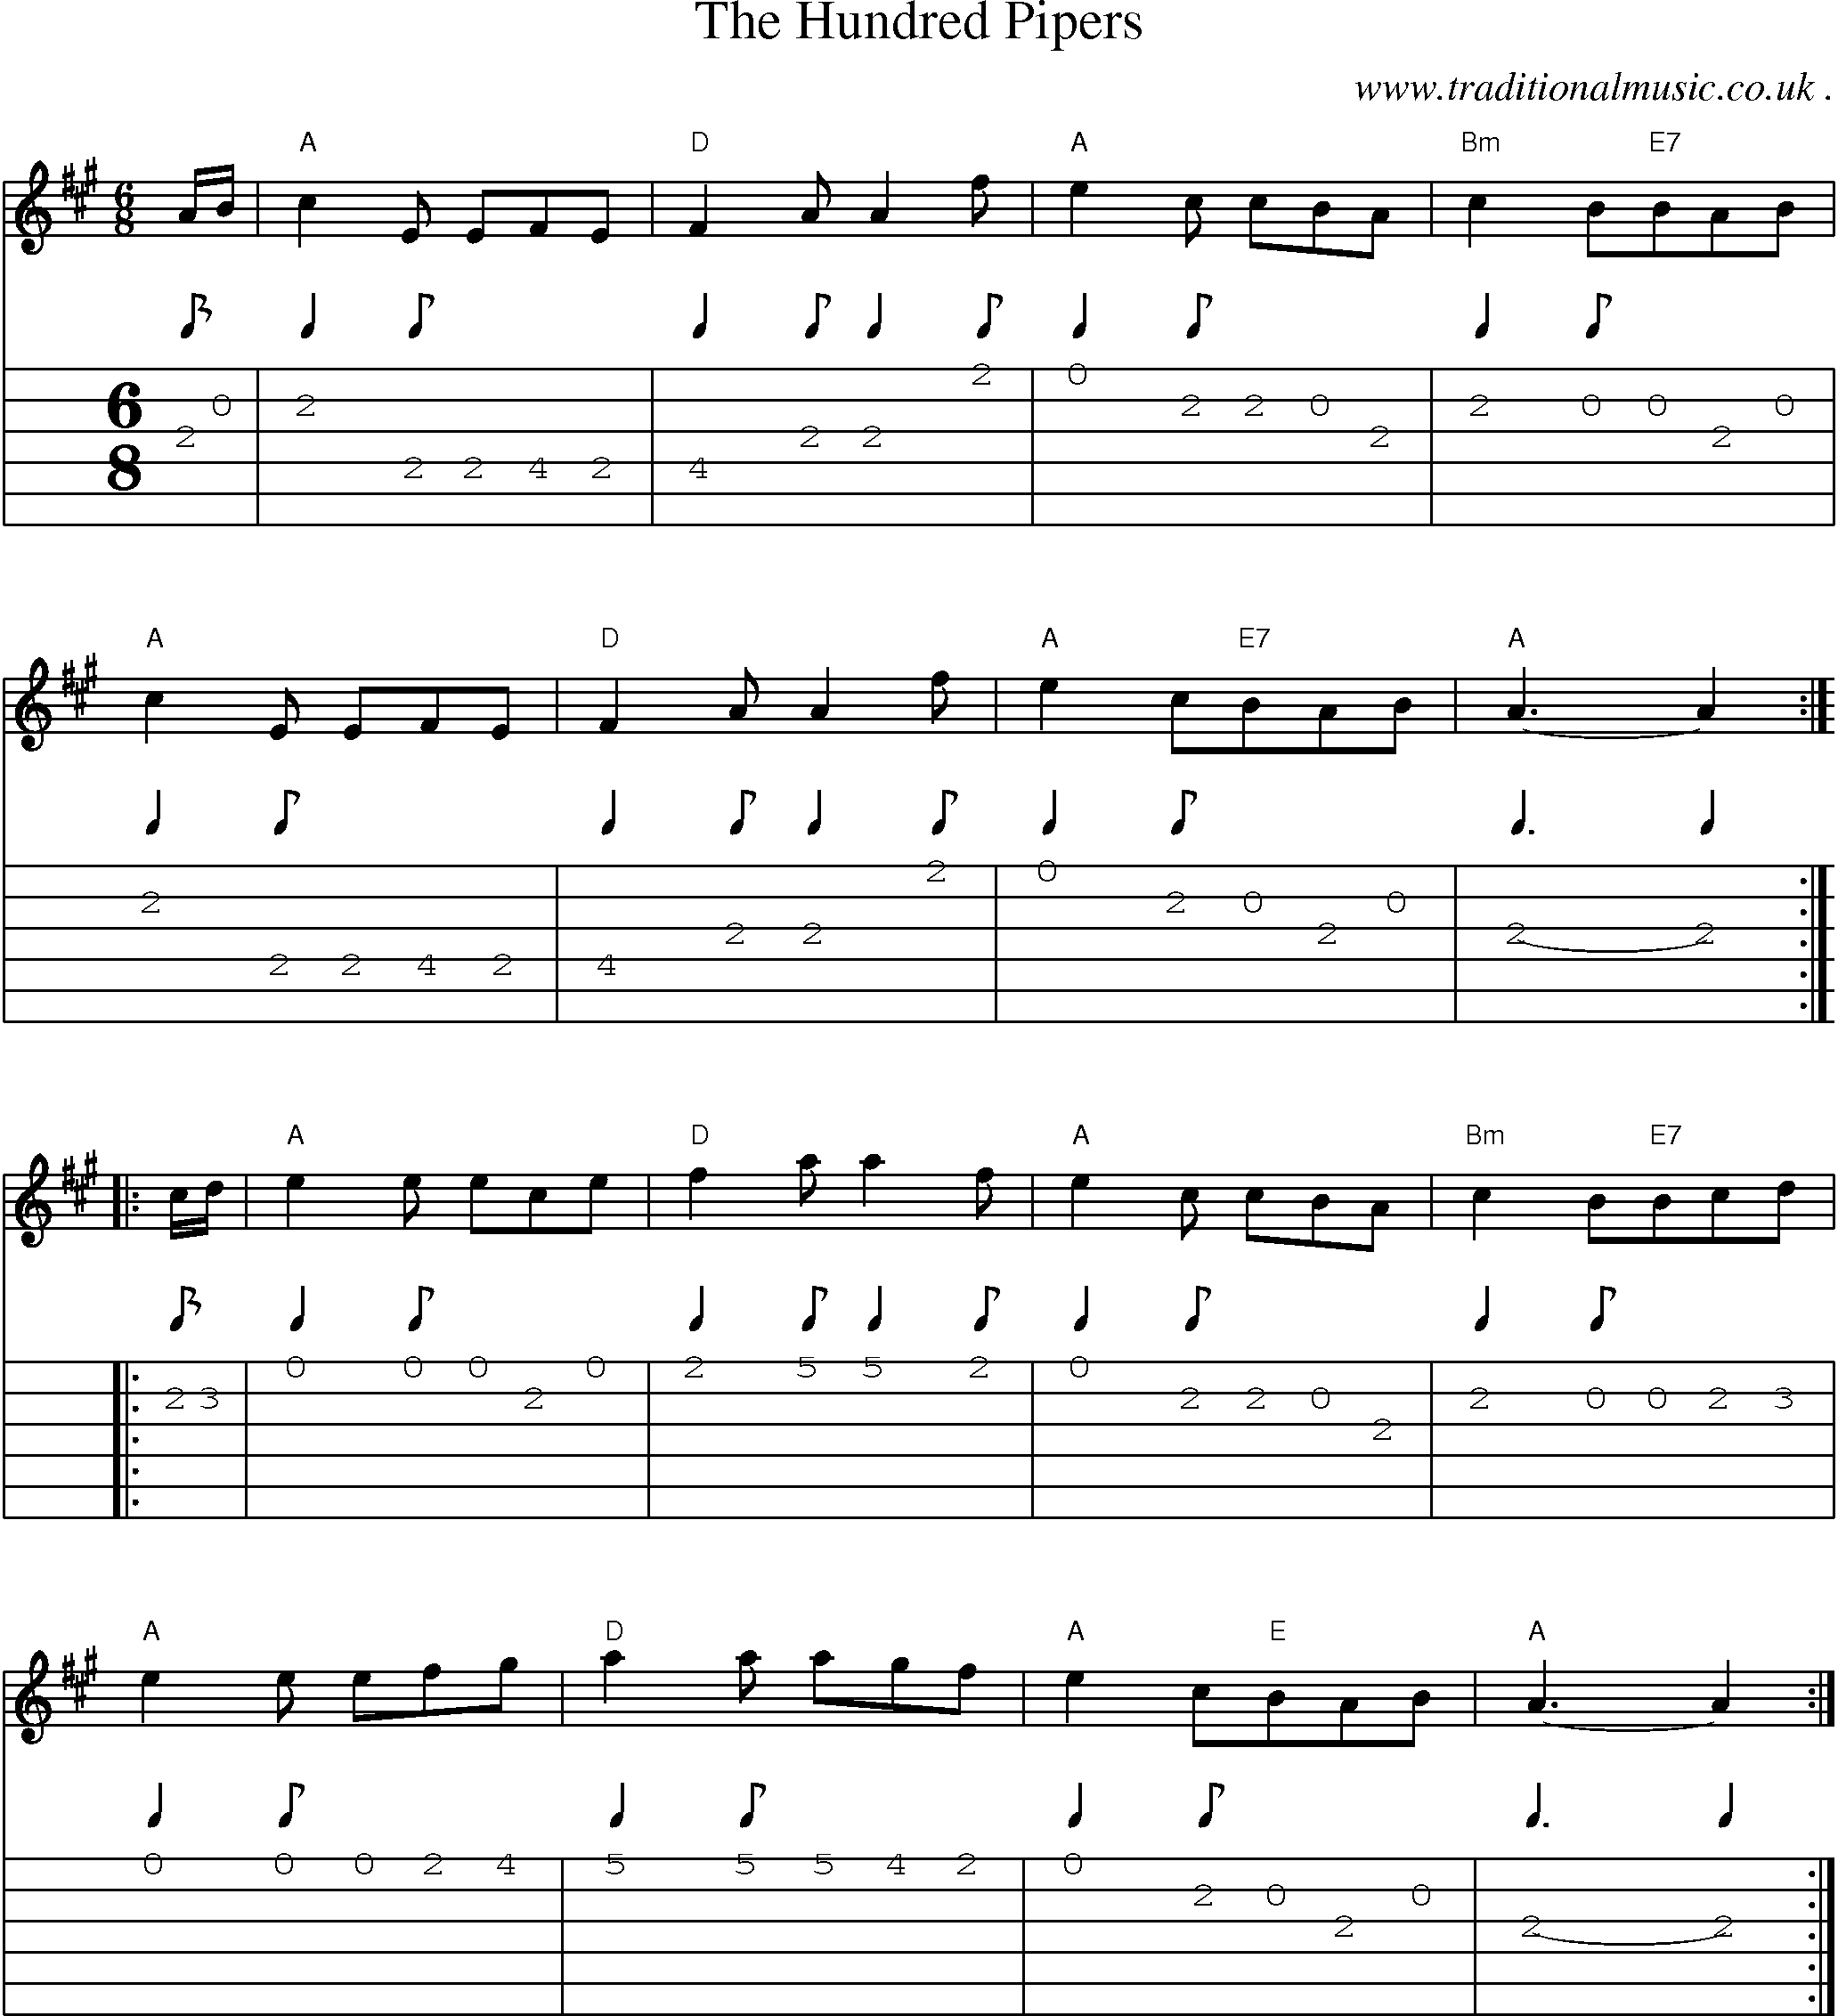 Sheet-Music and Guitar Tabs for The Hundred Pipers